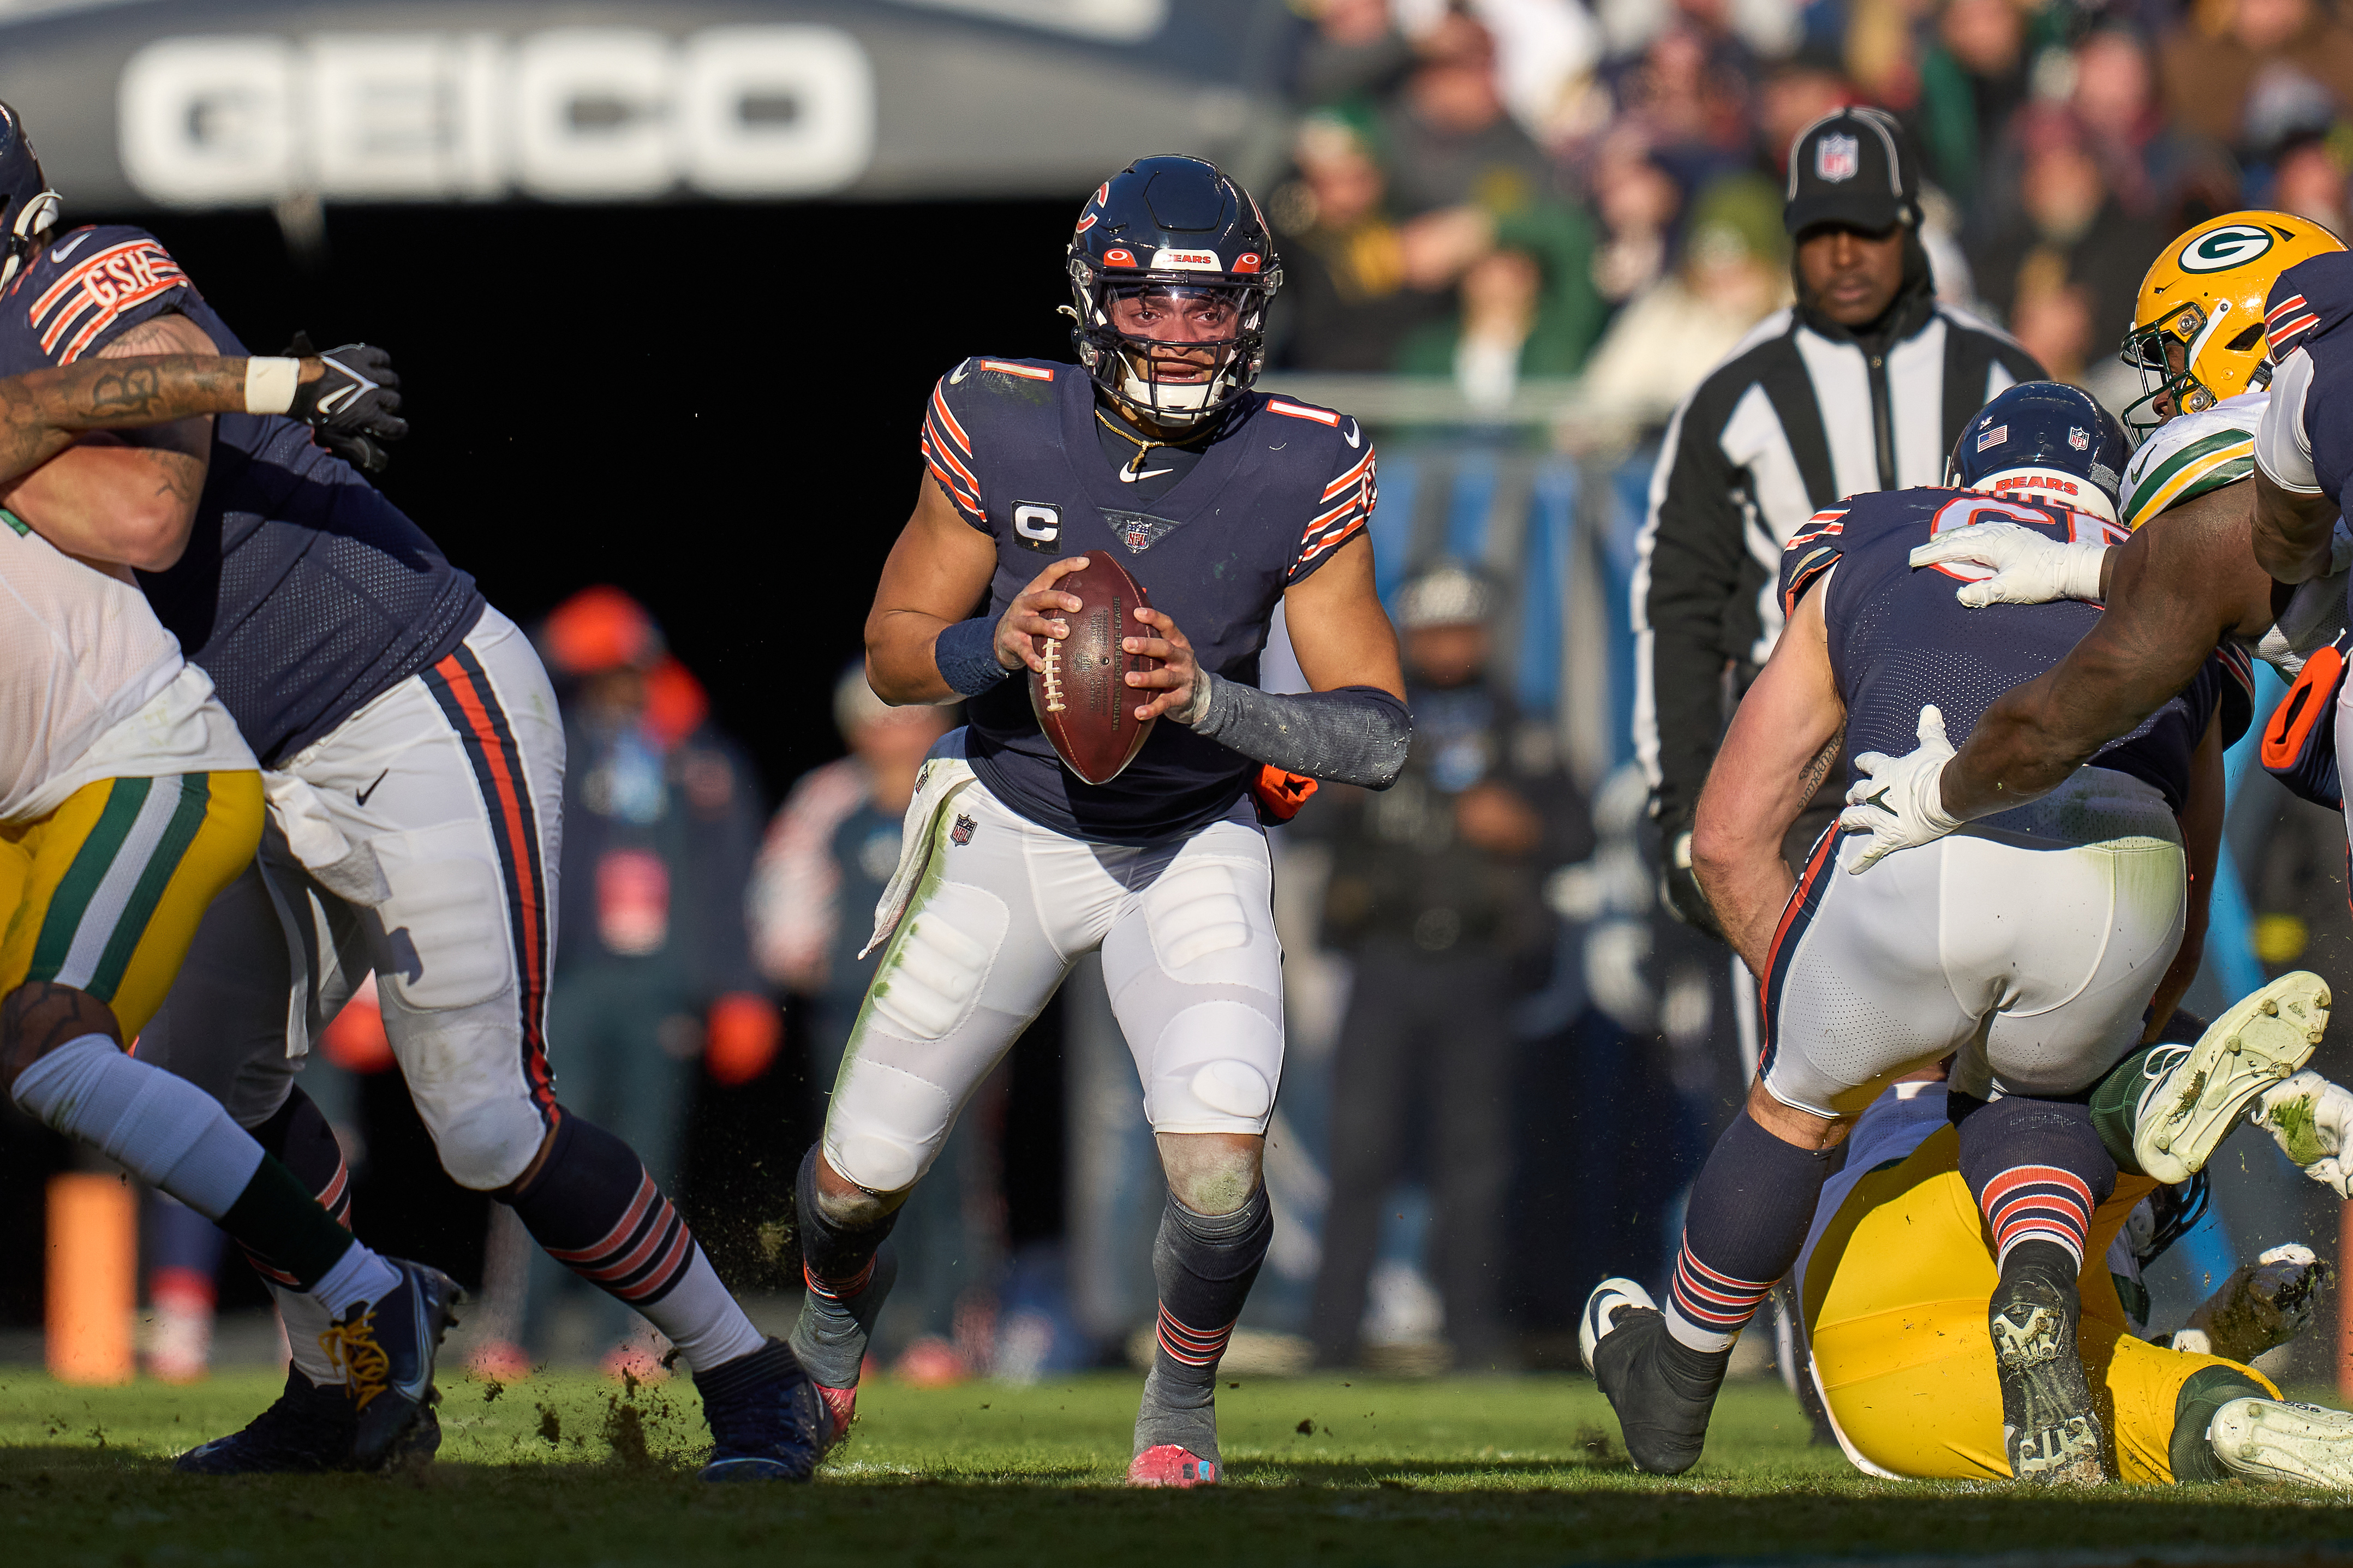 NFL: DEC 04 Packers at Bears